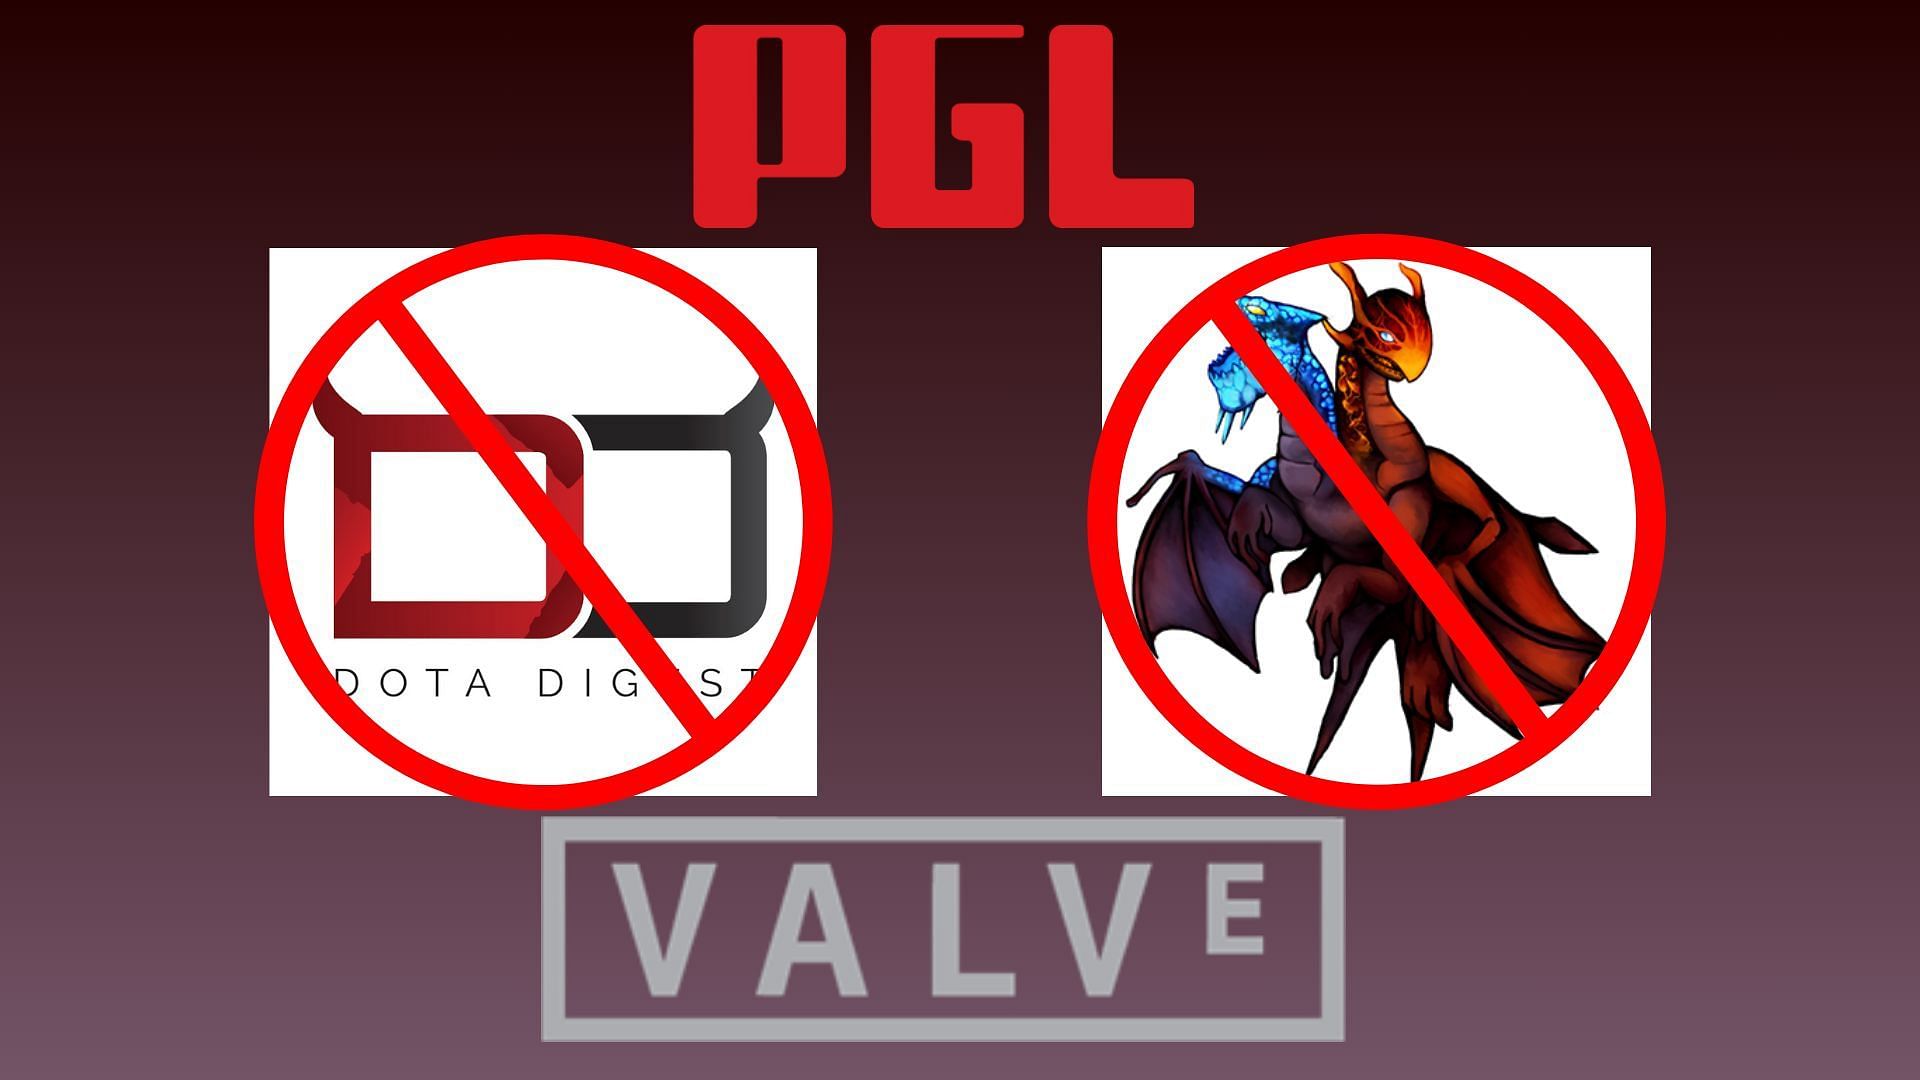 Dota Digest and NoobFromUA are to be banned on YouTube